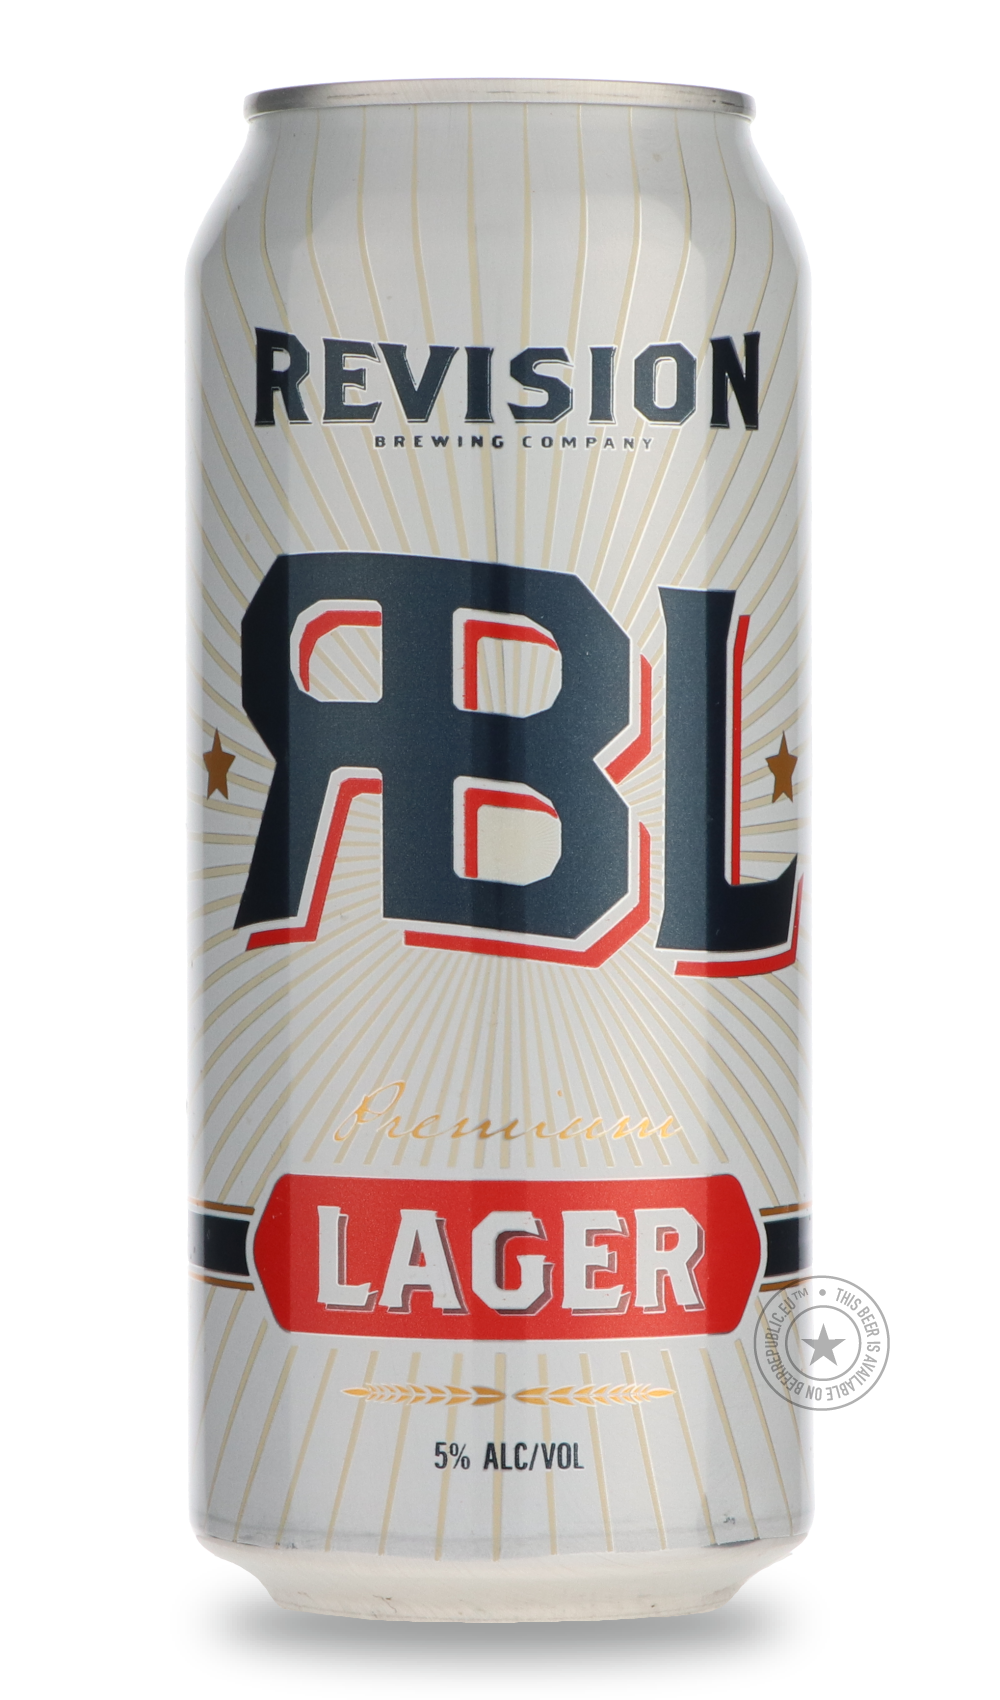 -Revision- RBL-Pale- Only @ Beer Republic - The best online beer store for American & Canadian craft beer - Buy beer online from the USA and Canada - Bier online kopen - Amerikaans bier kopen - Craft beer store - Craft beer kopen - Amerikanisch bier kaufen - Bier online kaufen - Acheter biere online - IPA - Stout - Porter - New England IPA - Hazy IPA - Imperial Stout - Barrel Aged - Barrel Aged Imperial Stout - Brown - Dark beer - Blond - Blonde - Pilsner - Lager - Wheat - Weizen - Amber - Barley Wine - Qua